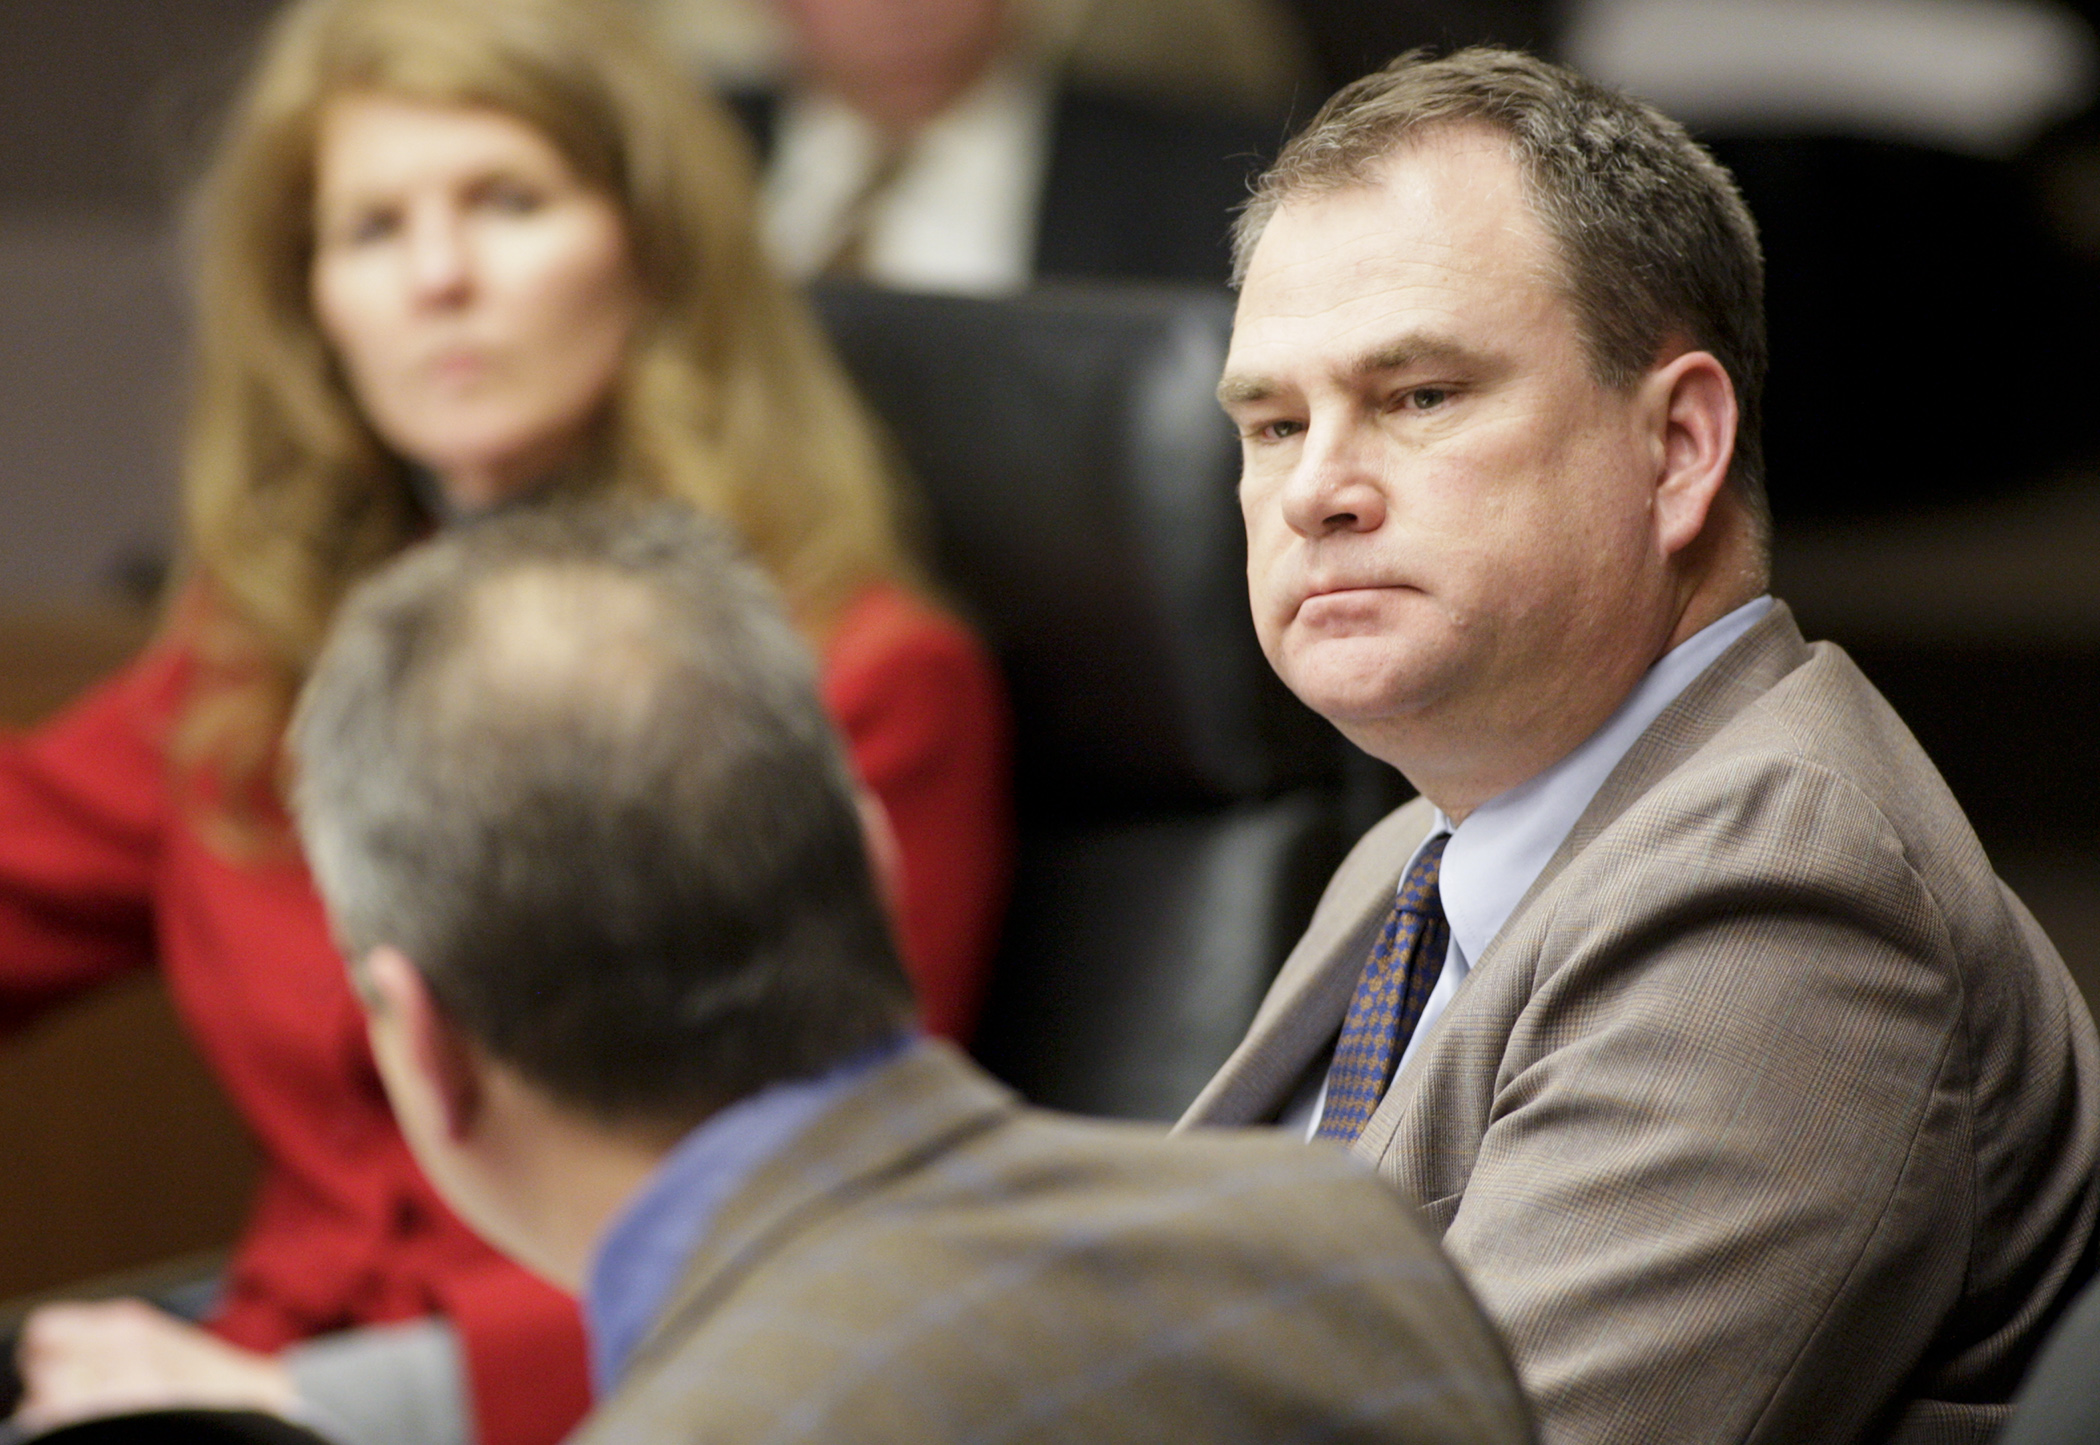 Rep. Joe Hoppe, right, listens as Jim Schowalter, president and CEO of the Minnesota Council of Health Plans, testifies Jan. 11 before House Commerce and Regulatory Reform Committee in support of HF5, which would provide for a state-operated reinsurance program. Photo by Paul Battaglia